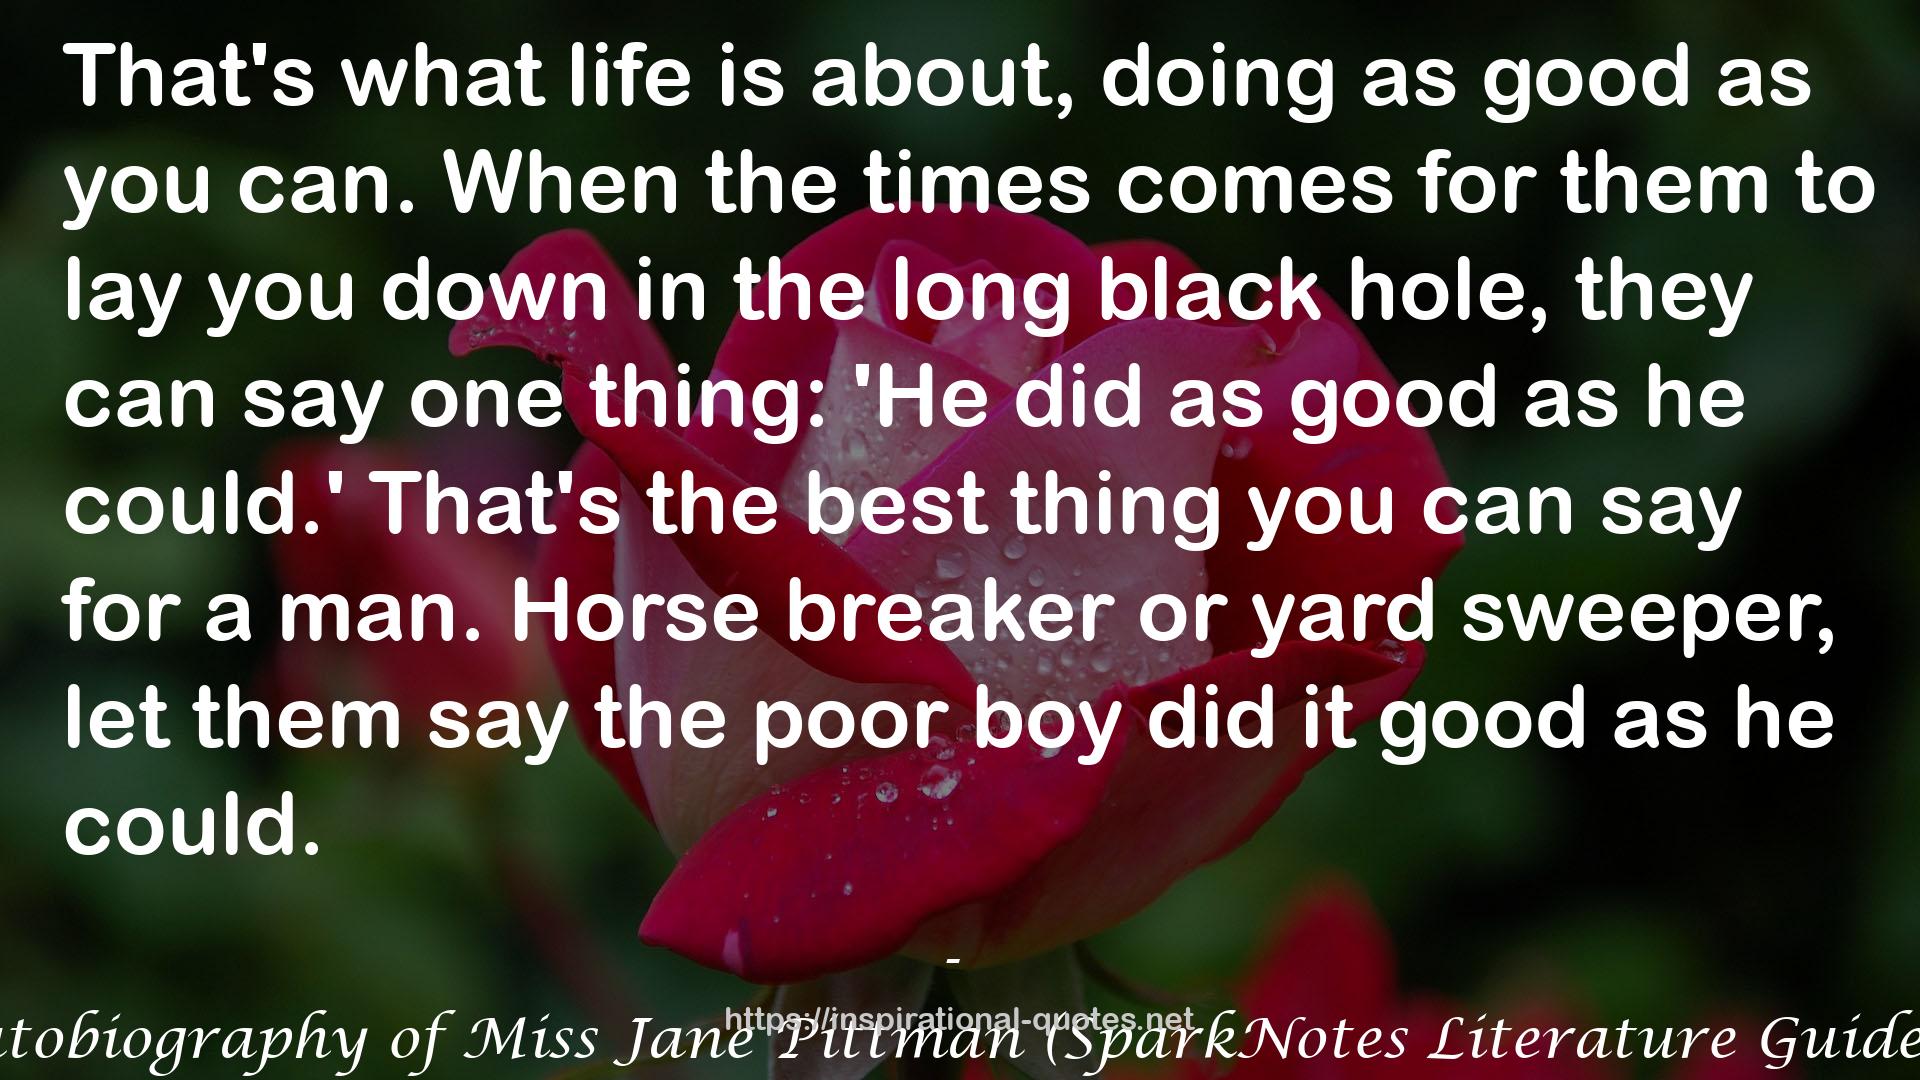 The Autobiography of Miss Jane Pittman (SparkNotes Literature Guide Series) QUOTES